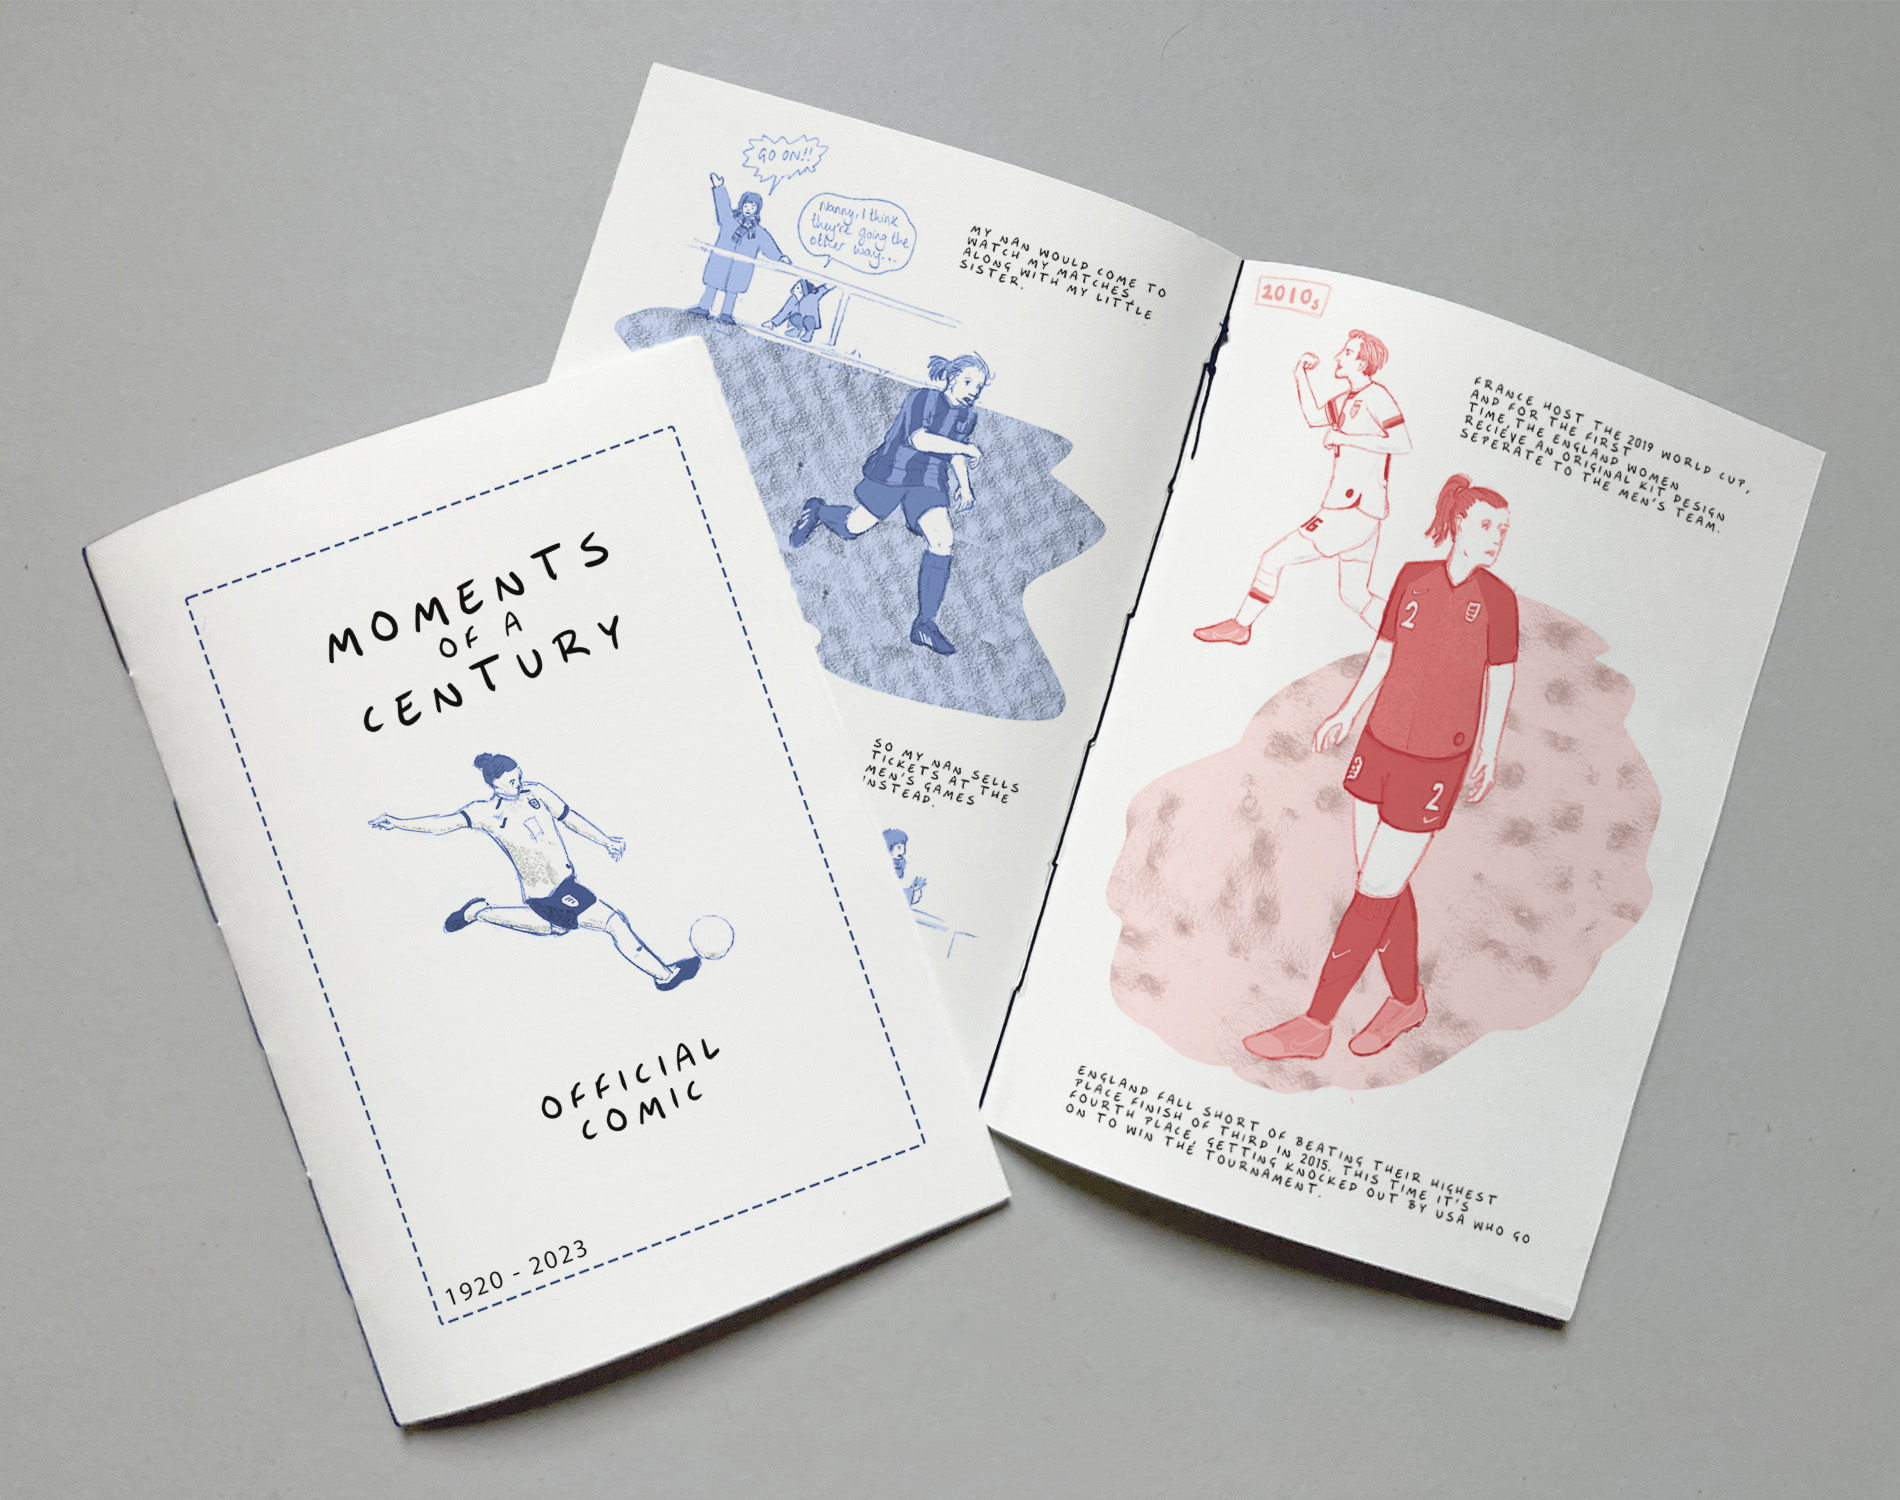 Short 16-page comic on the past century of women's football in England. Two booklet of the comic 'Moments of a Century' by Jessie Barrett. One booklet shows the cover page, the other is opened on a spread.